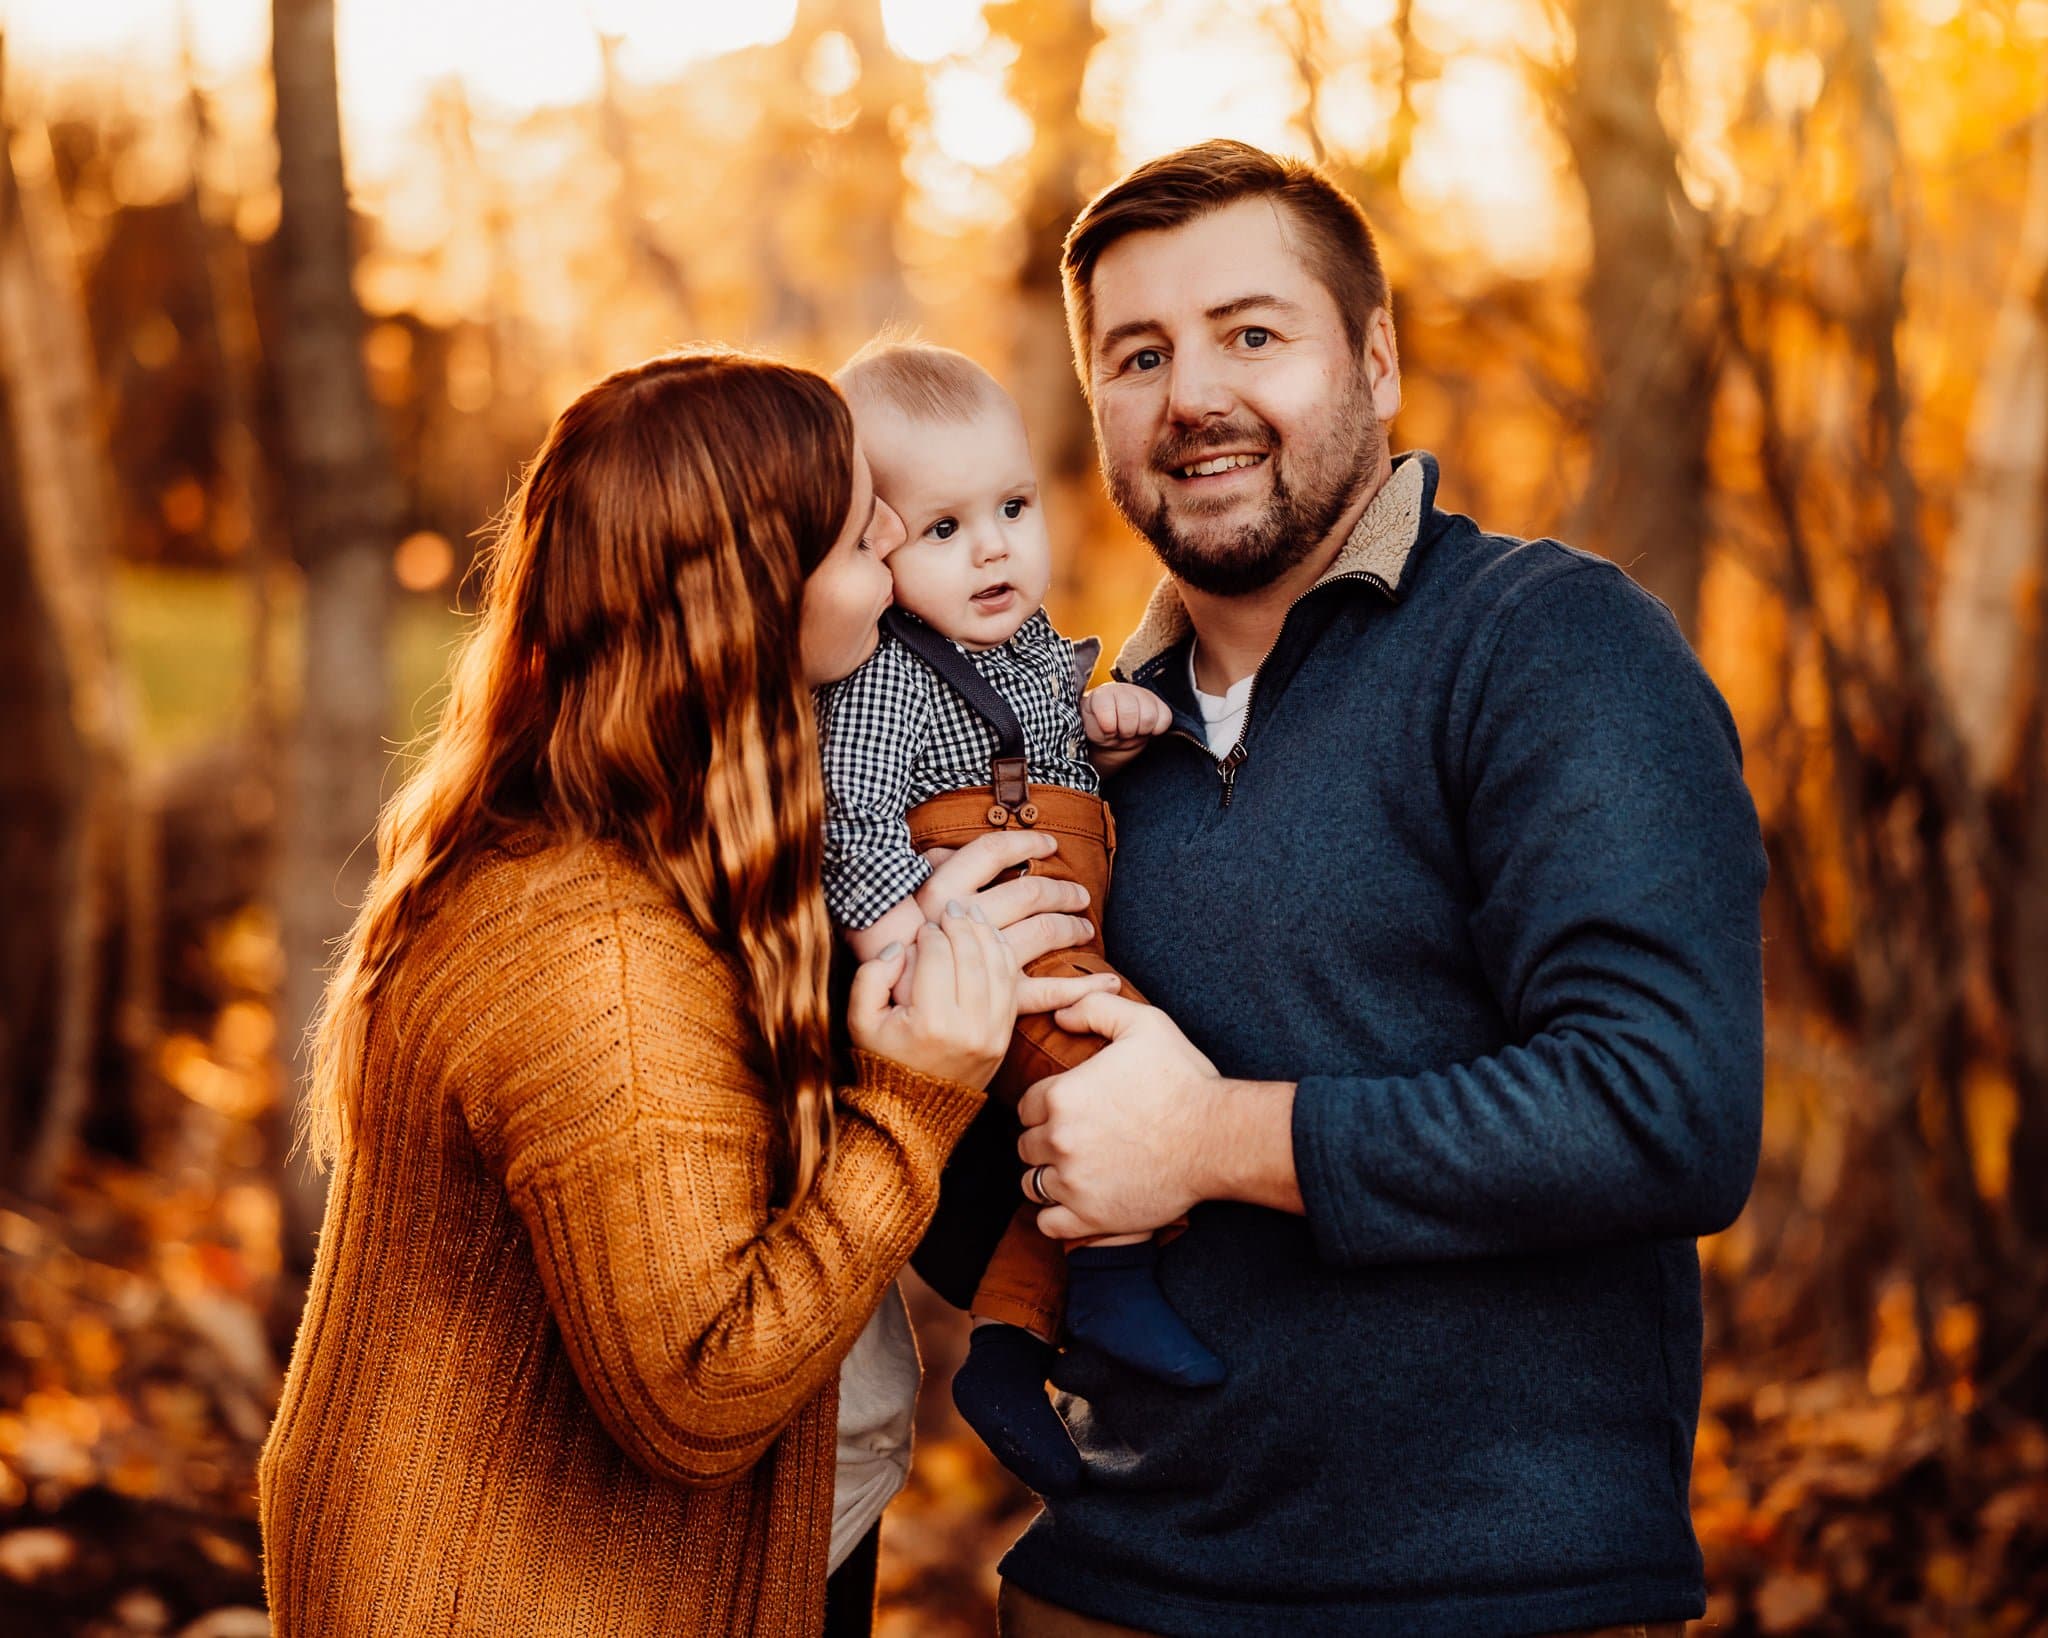 Family photo with baby against fall background